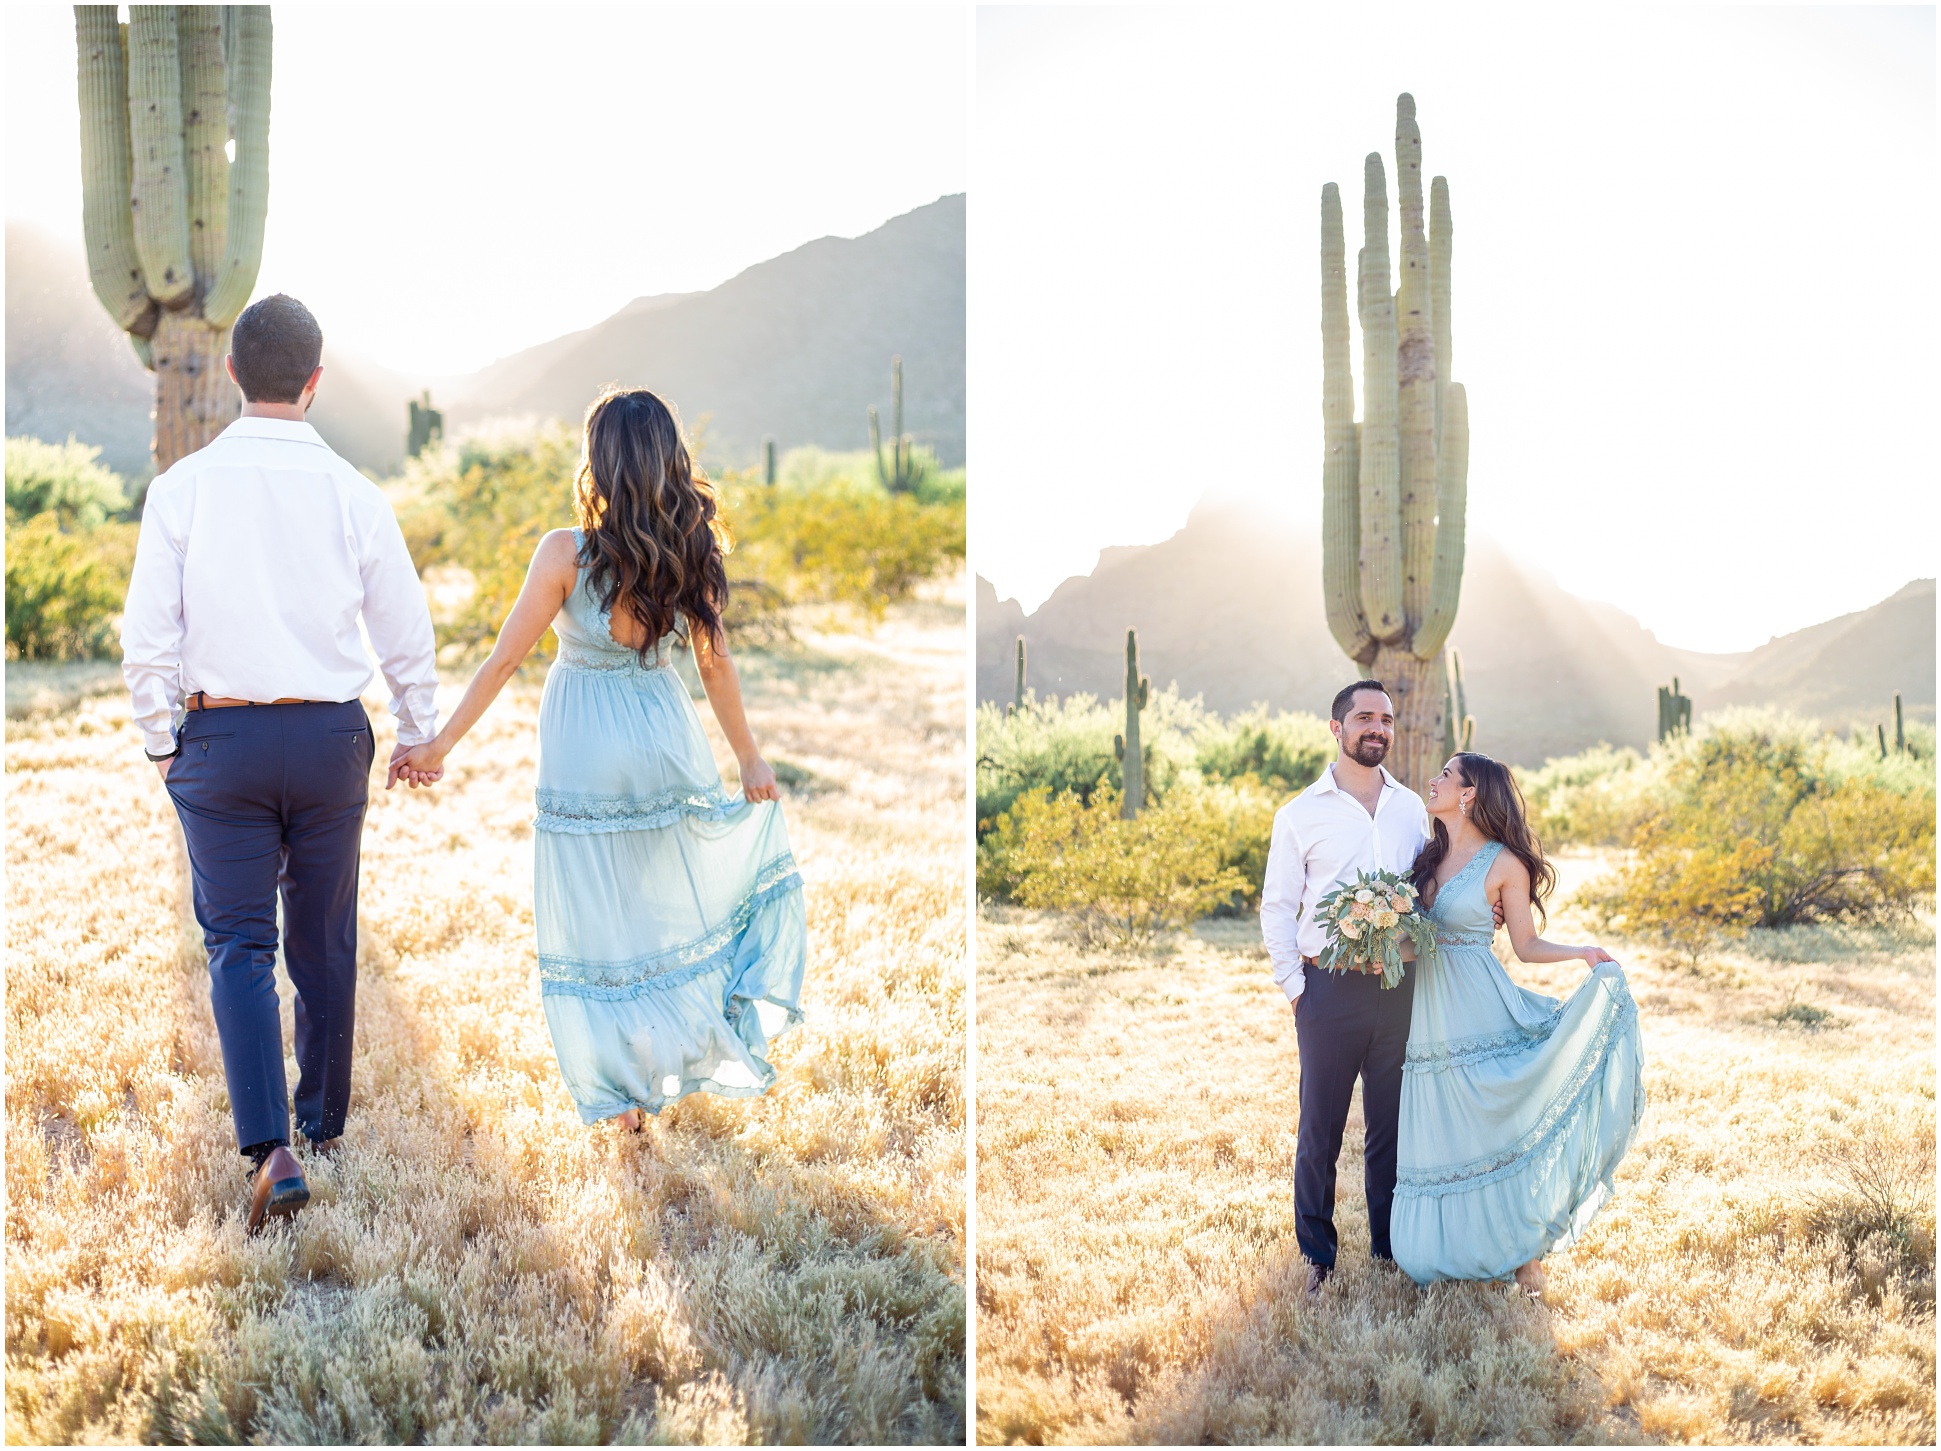 Left: Paul and Anette walking away from the camera, Right: Paul and Anette standing in front of a saguaro in the desert